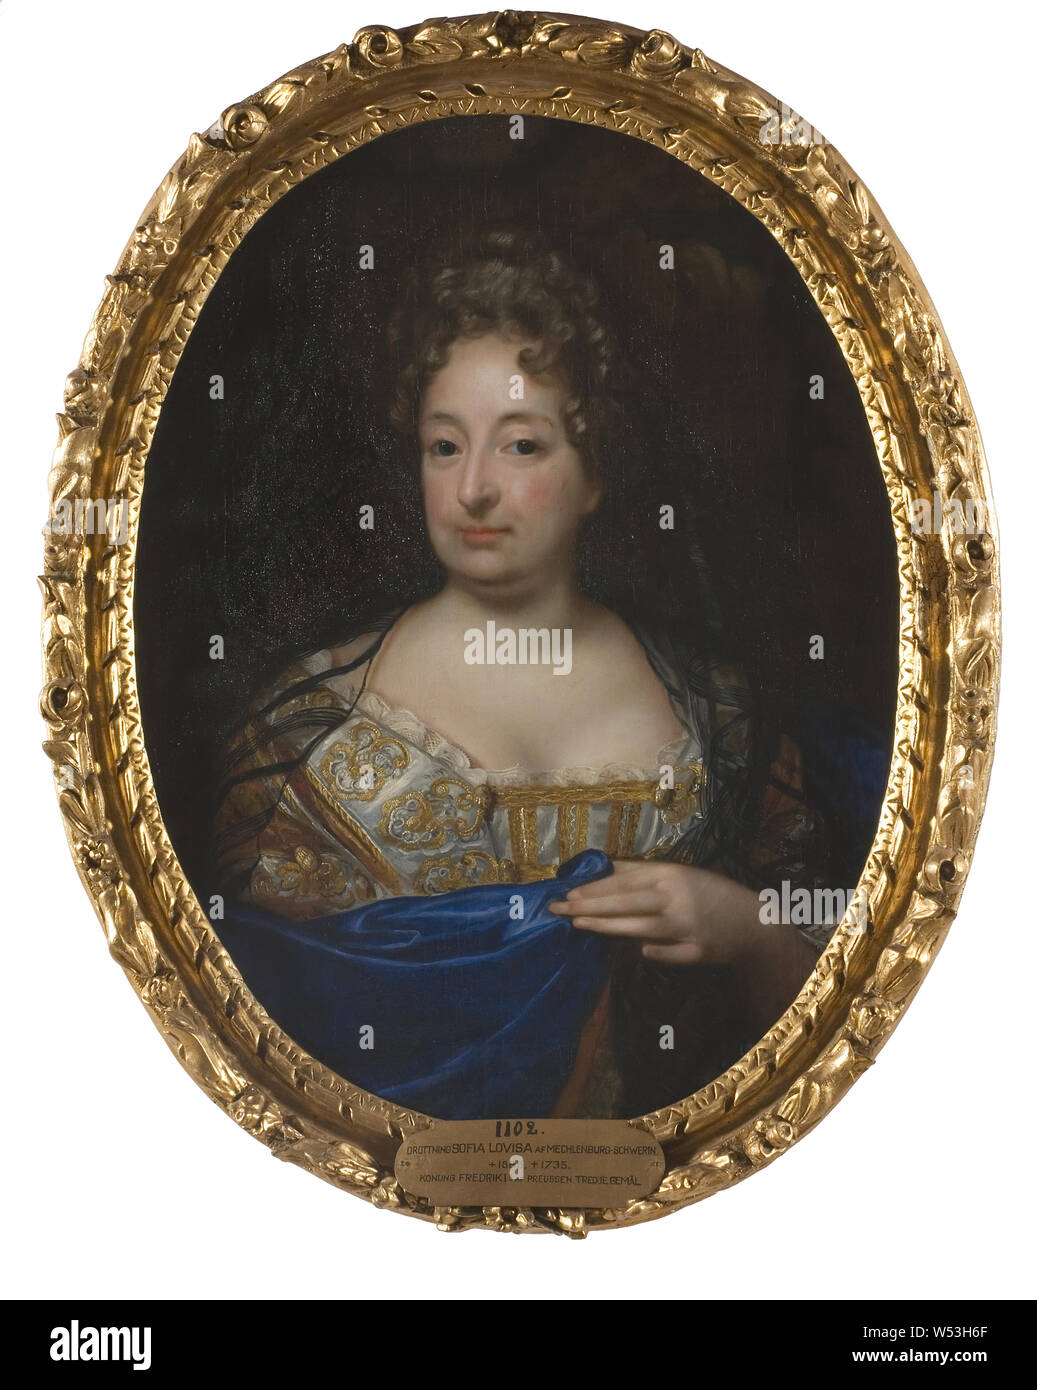 Attributed to David von Krafft, Queen Sofia Charlotta, Sofia Charlotta, 1668-1705, Princess of Palatinate, Duchess of Braunschweig-Lüneburg, painting, portrait, Sophia Charlotte of Hanover, oil on canvas, Framed, Height, 88 cm (34.6 inches), Width, 70 cm (27.5 inches), Depth, 8 cm (3.1 inches) Stock Photo